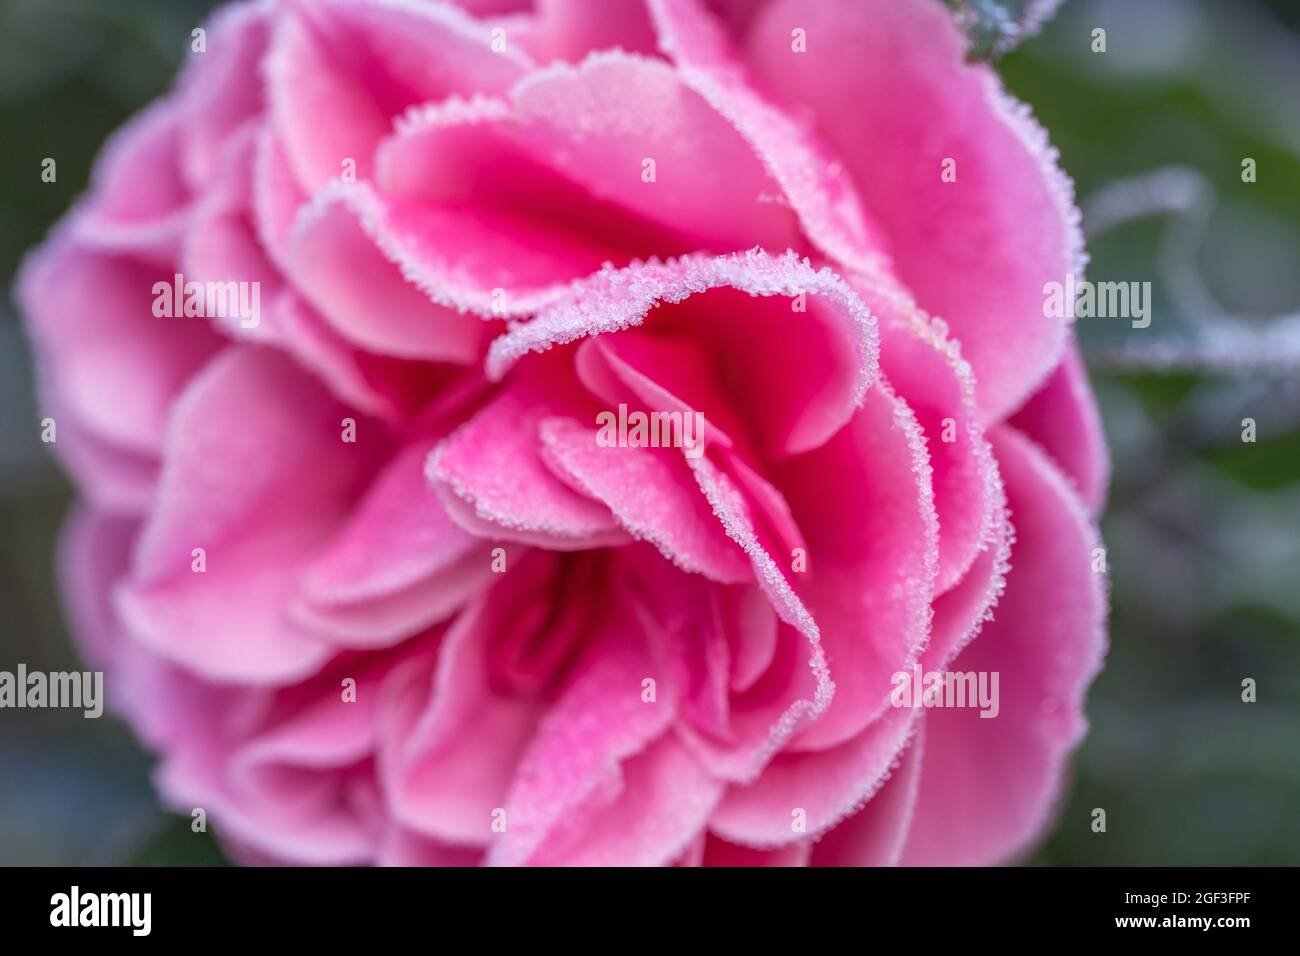 Winter in the garden. Hoarfrost on the petals of a pink rose Stock Photo